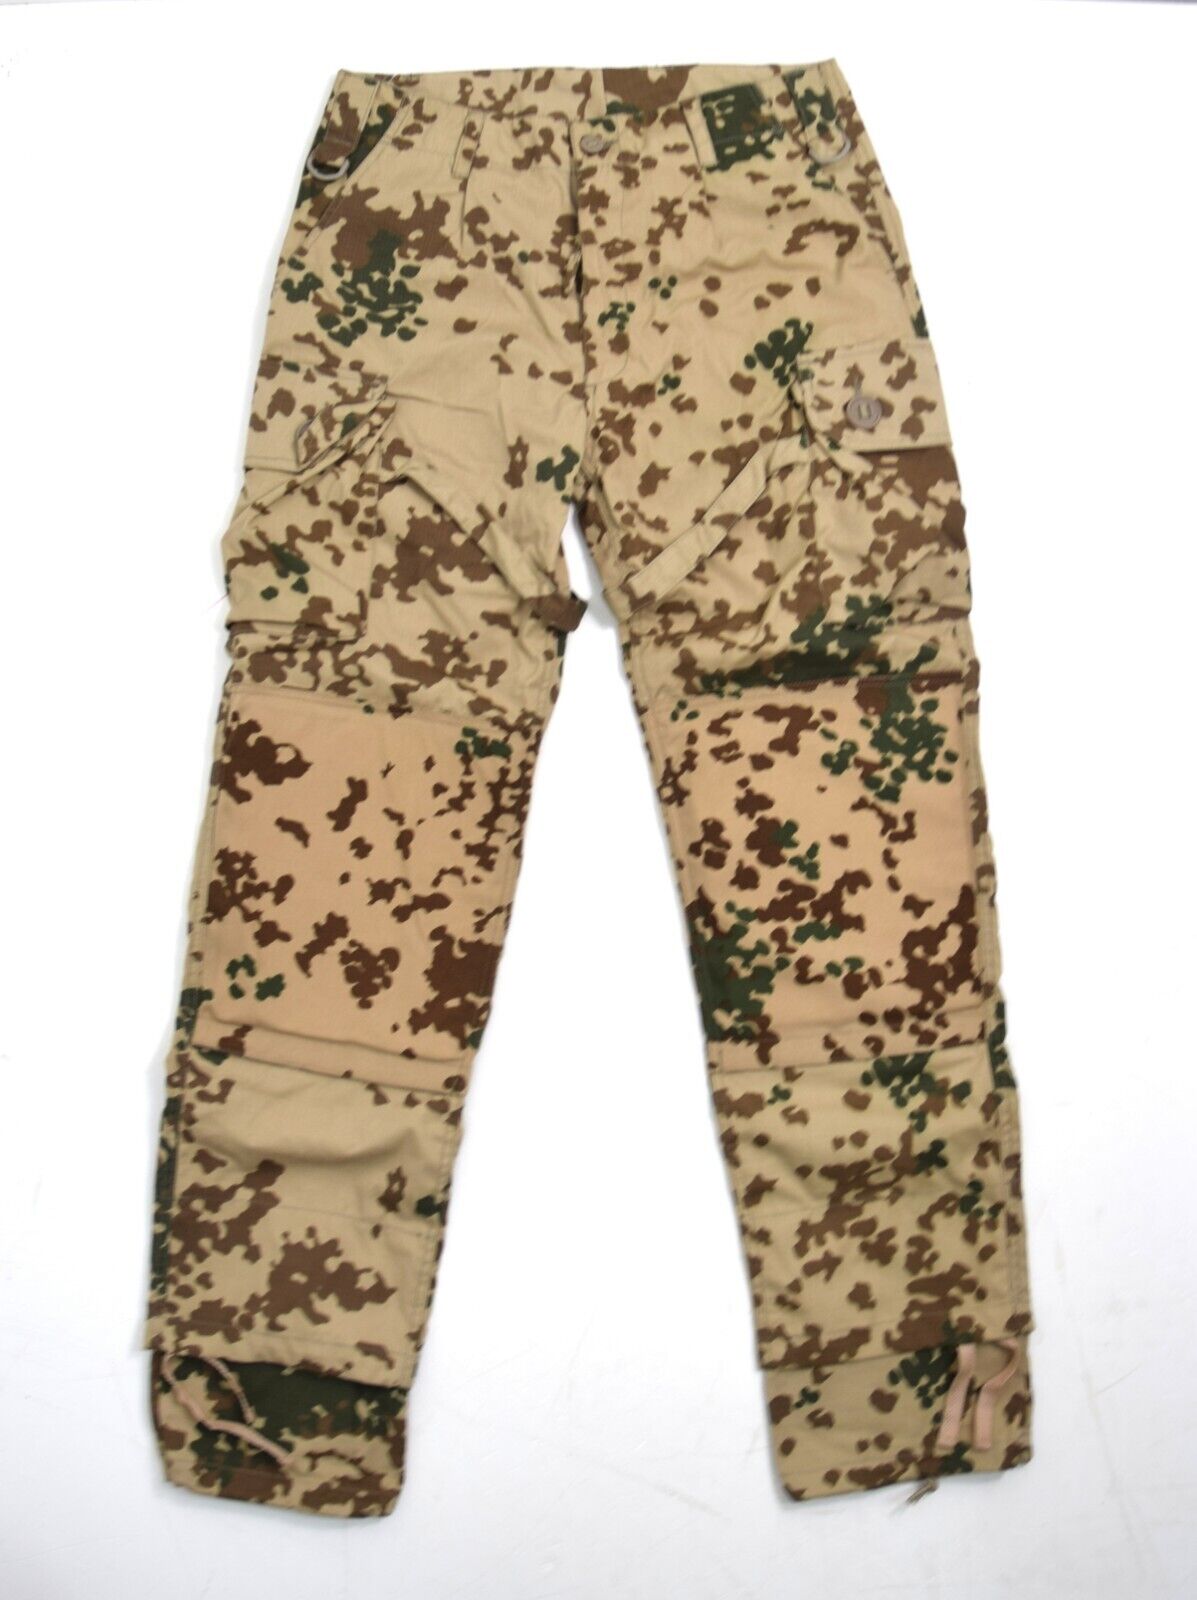 German Army Tactical Commando Pants Trousers Special Forces Tropetarn Desert KSK